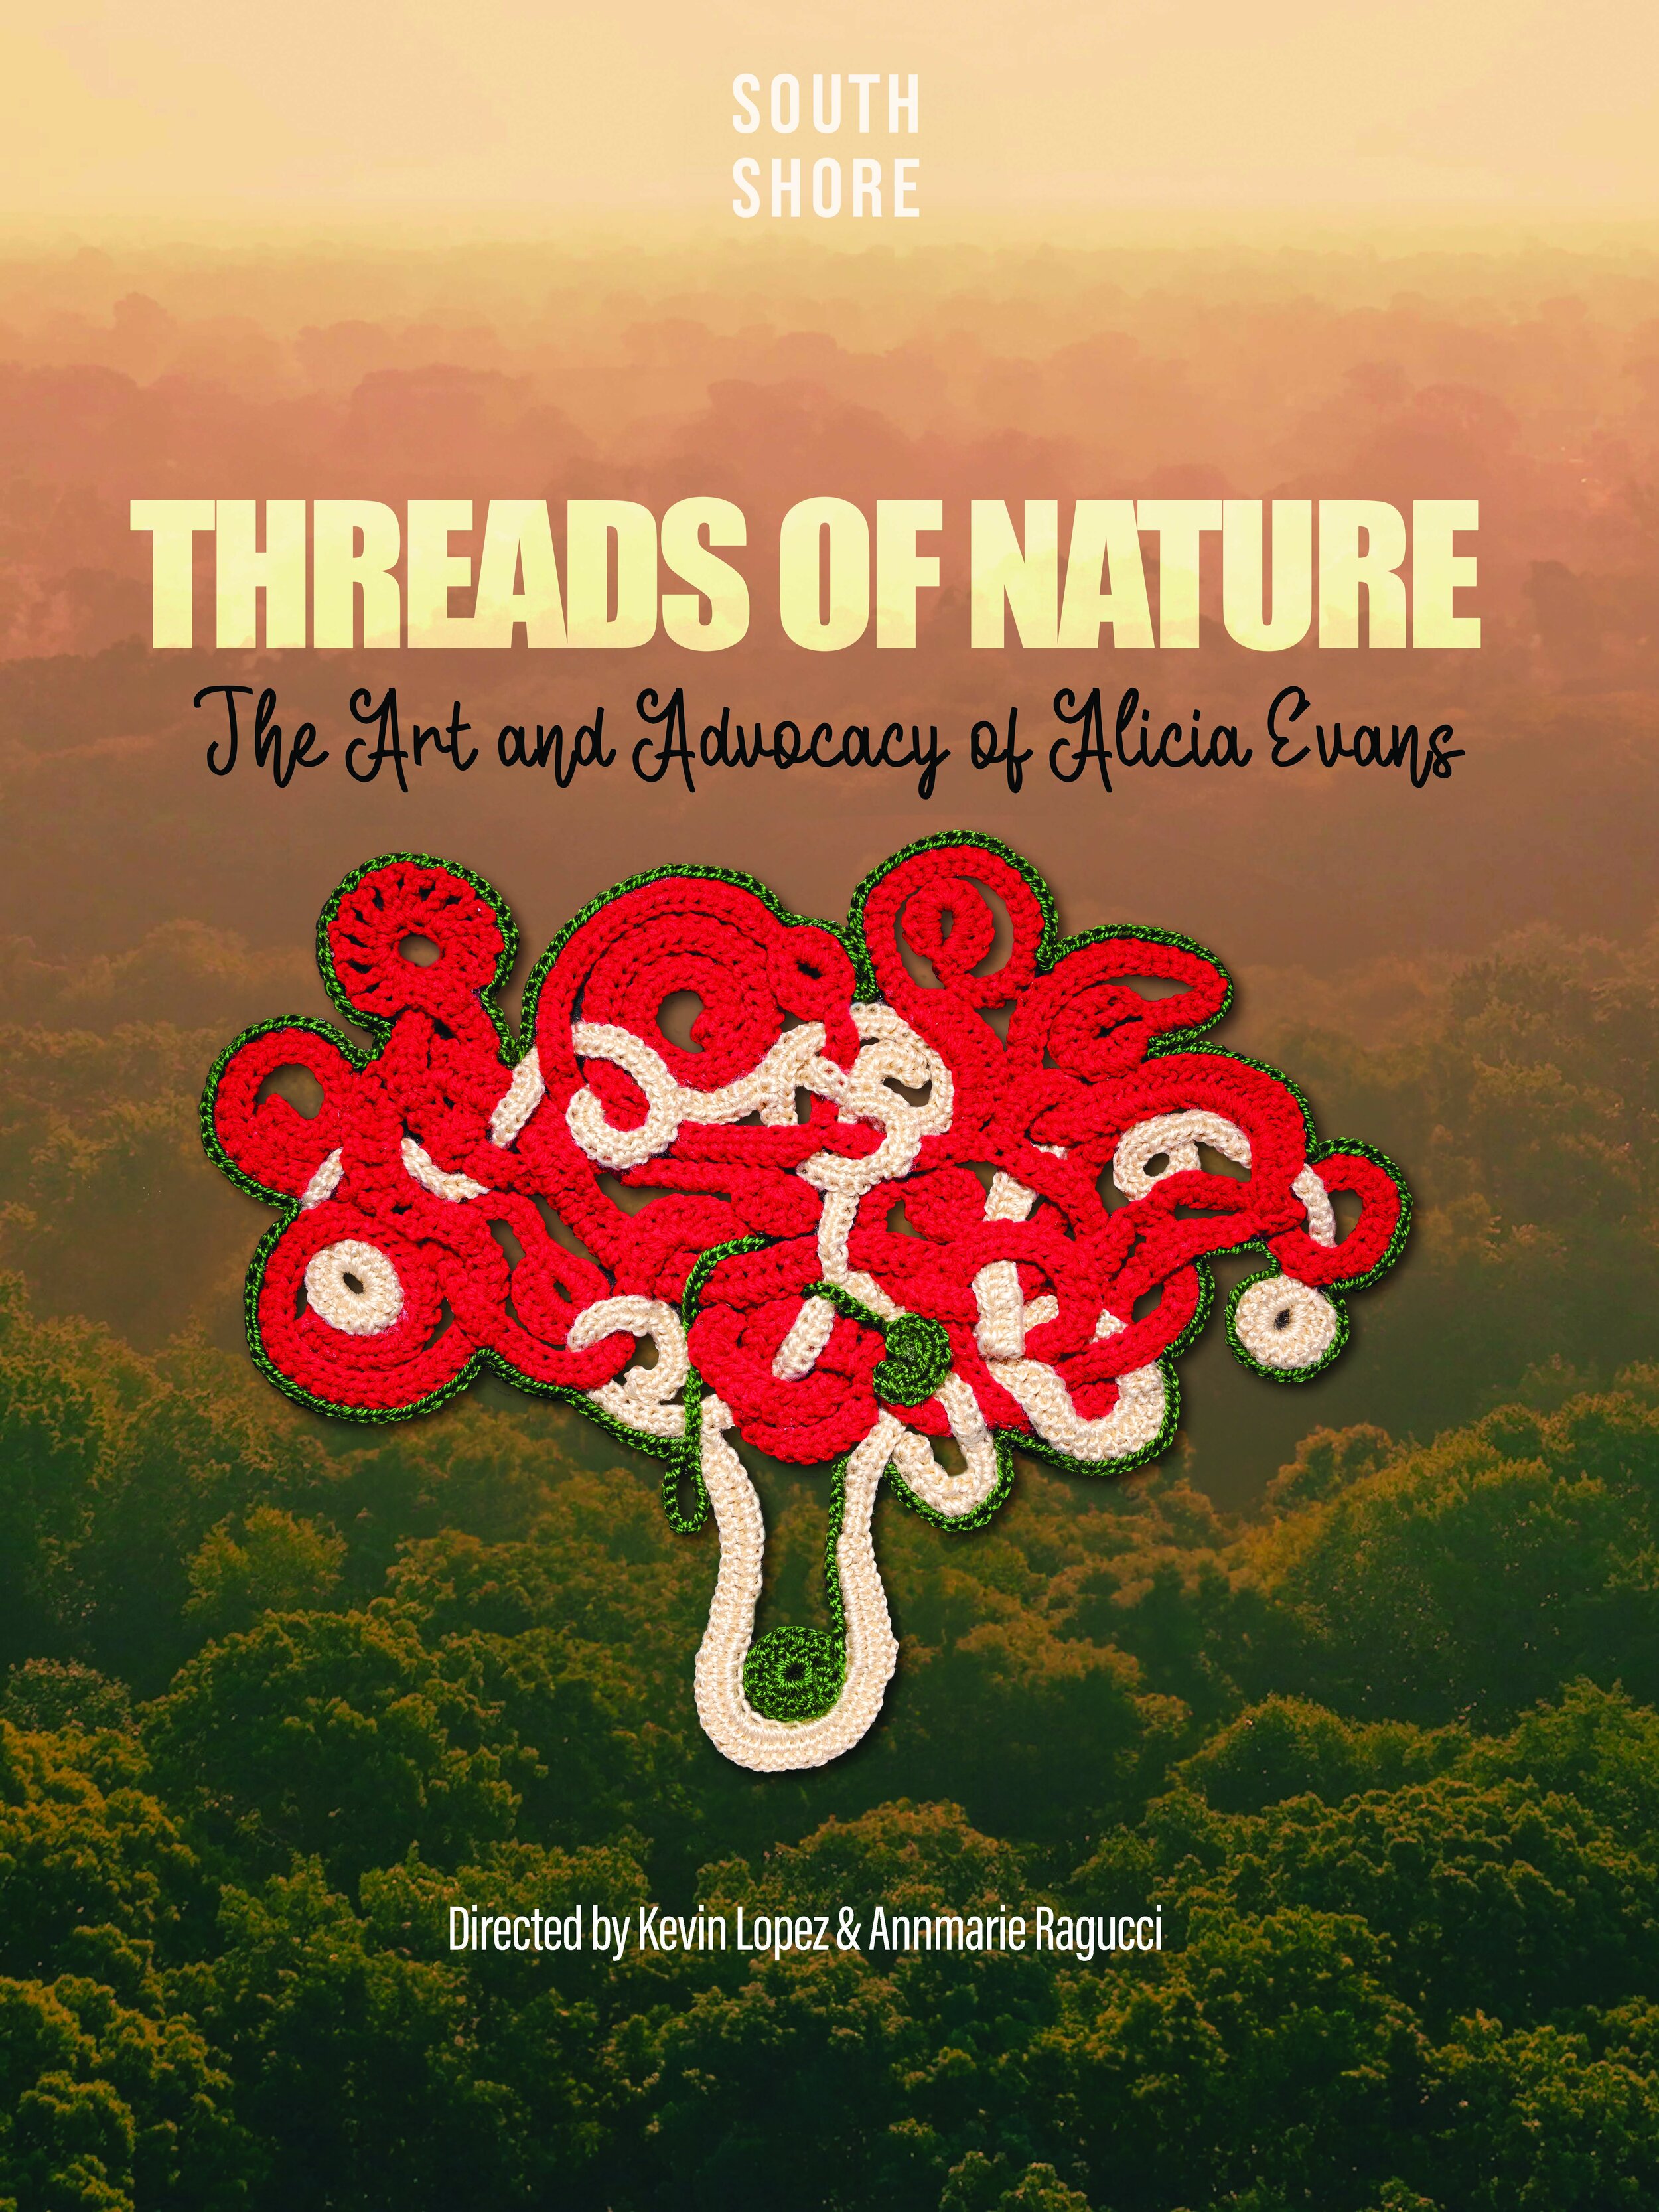 Poster_Threads_of_Nature.jpg